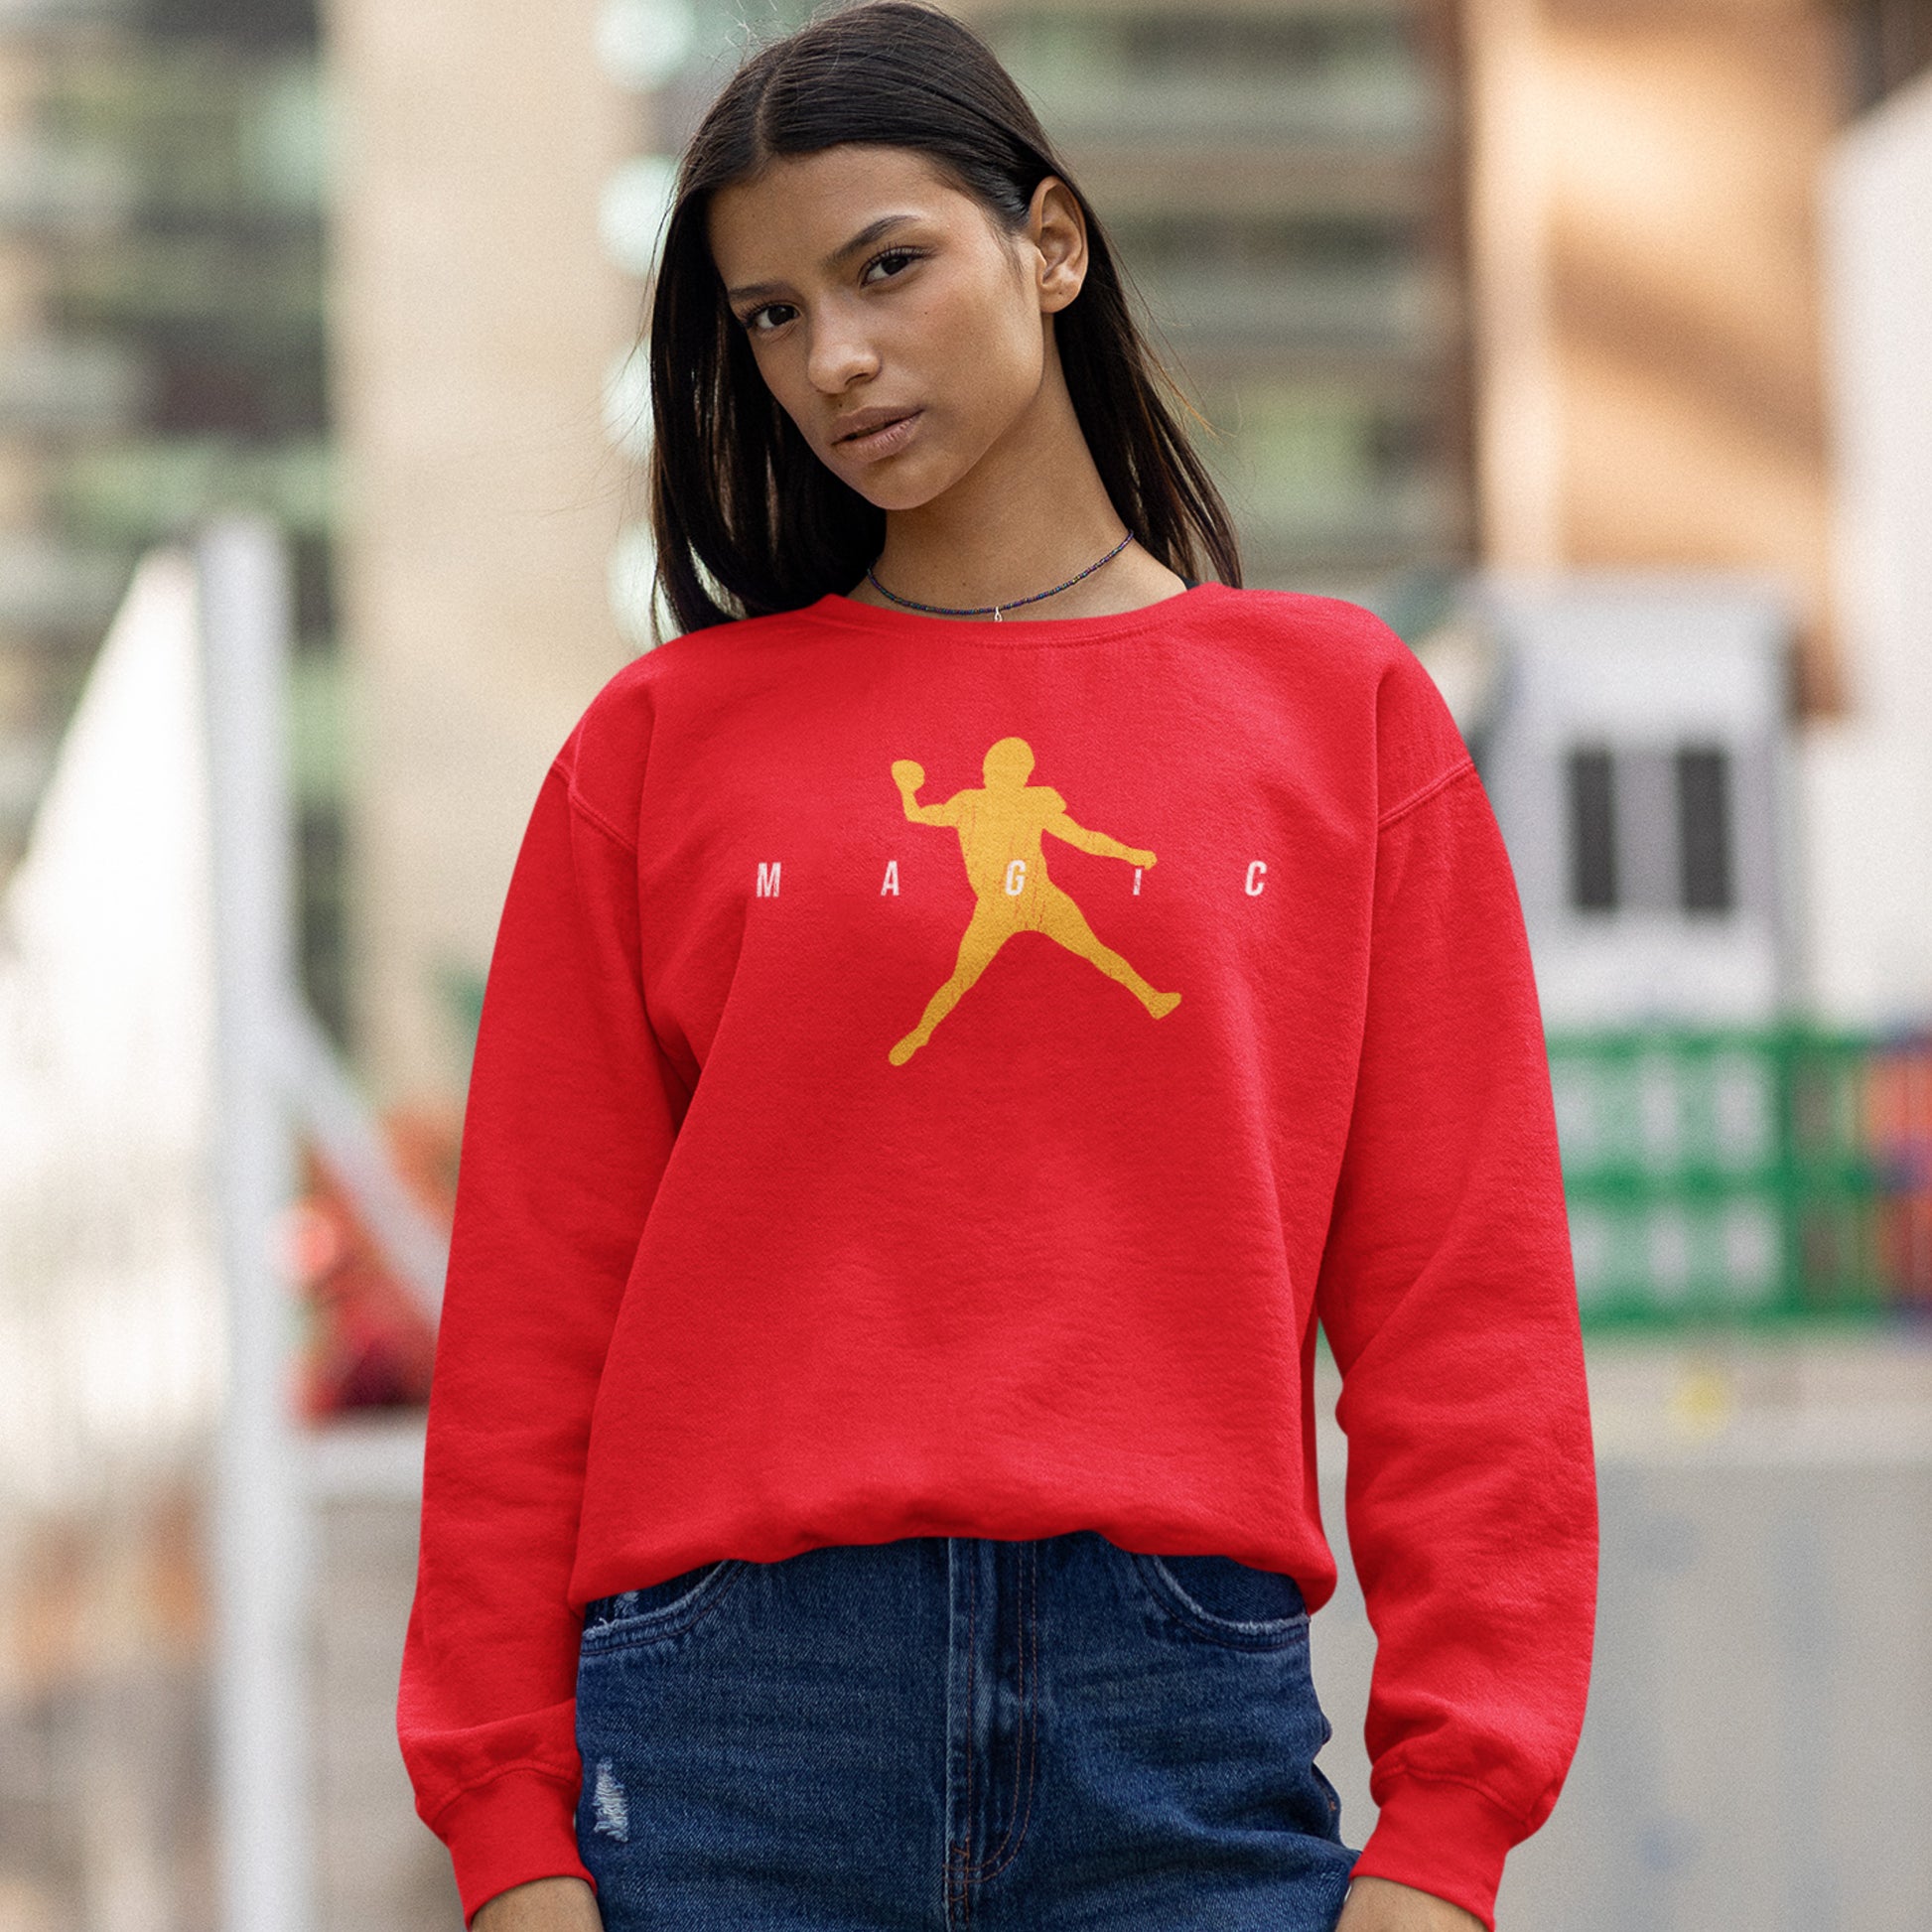 KC Swag Kansas City Chiefs Distressed White & Gold Magic Air Mahomie on a Red Crewneck Sweatshirt worn by a female model wearing jeans standing in a downtown plaza